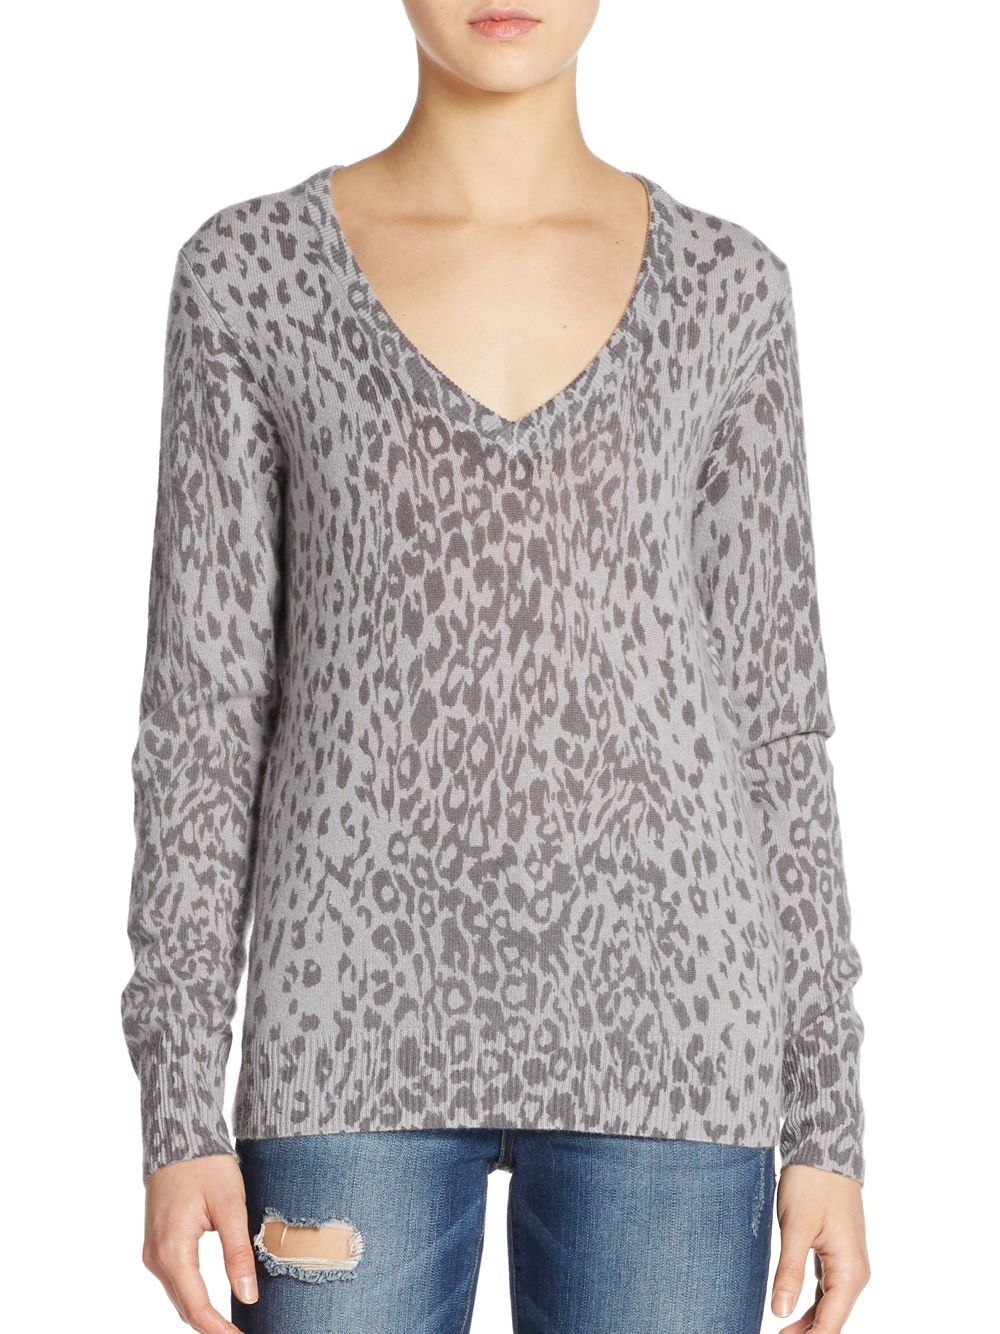 Lyst - Equipment Cecile Cashmere Animal-print Sweater in Gray